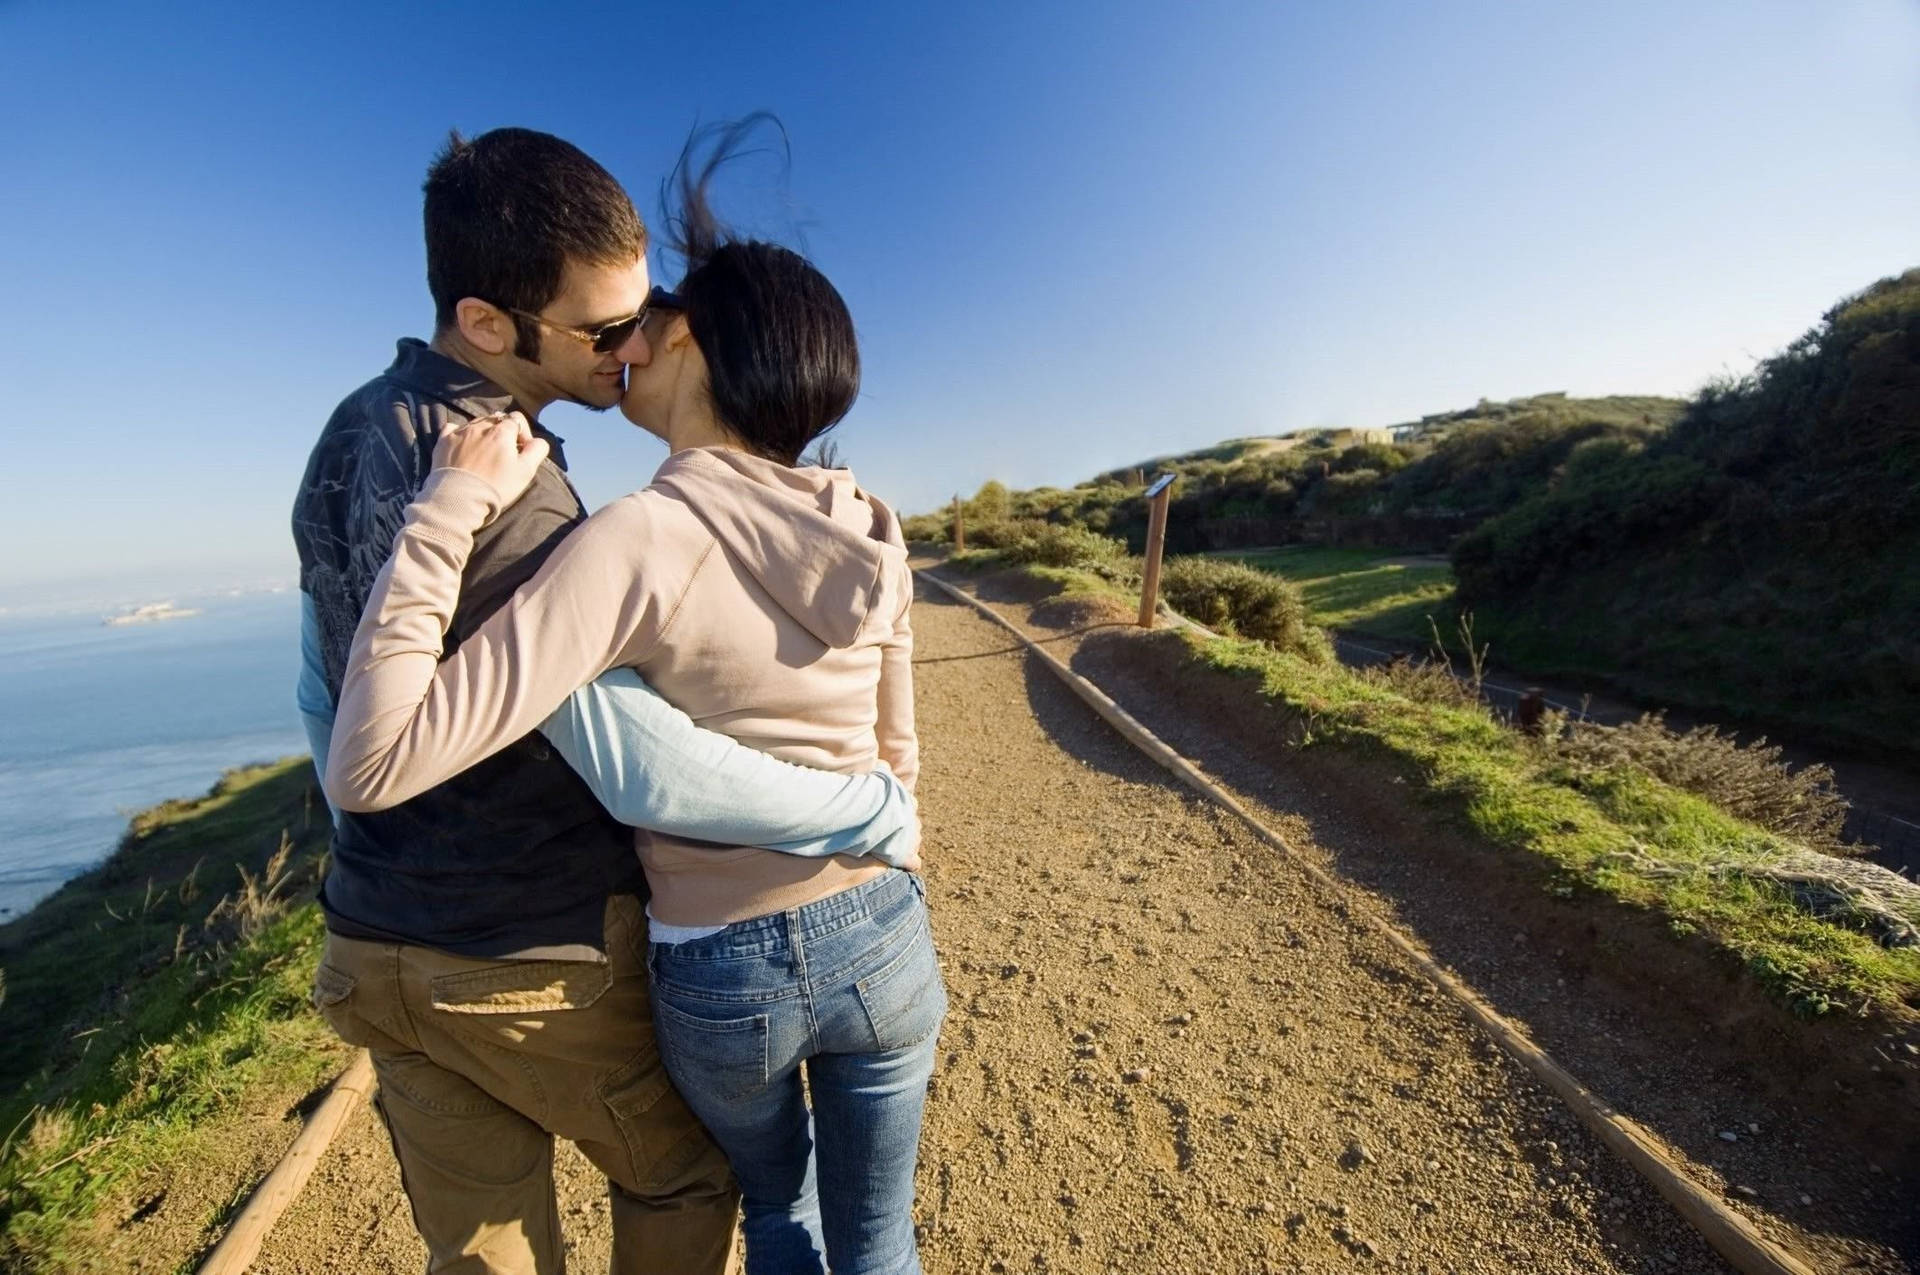 Couple's Romantic Love On A Hill